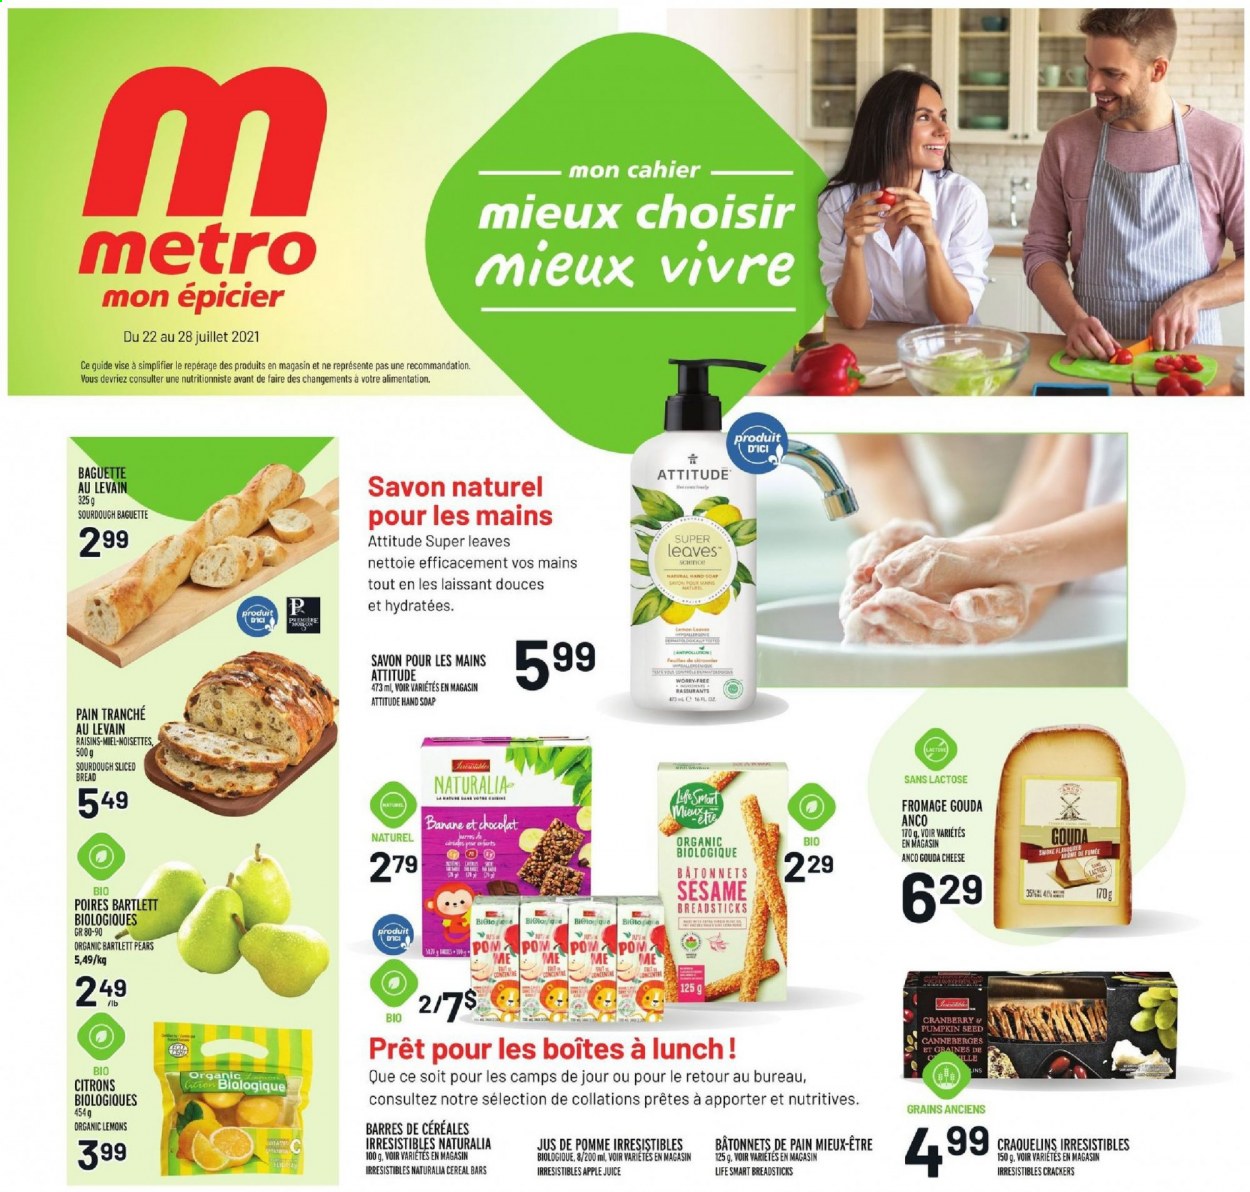 thumbnail - Metro Flyer - July 22, 2021 - July 28, 2021 - Sales products - bread, Bartlett pears, pears, lemons, gouda, cheese, cereal bar, crackers, bread sticks, cereals, dried fruit, apple juice, juice, hand soap, soap, raisins. Page 1.